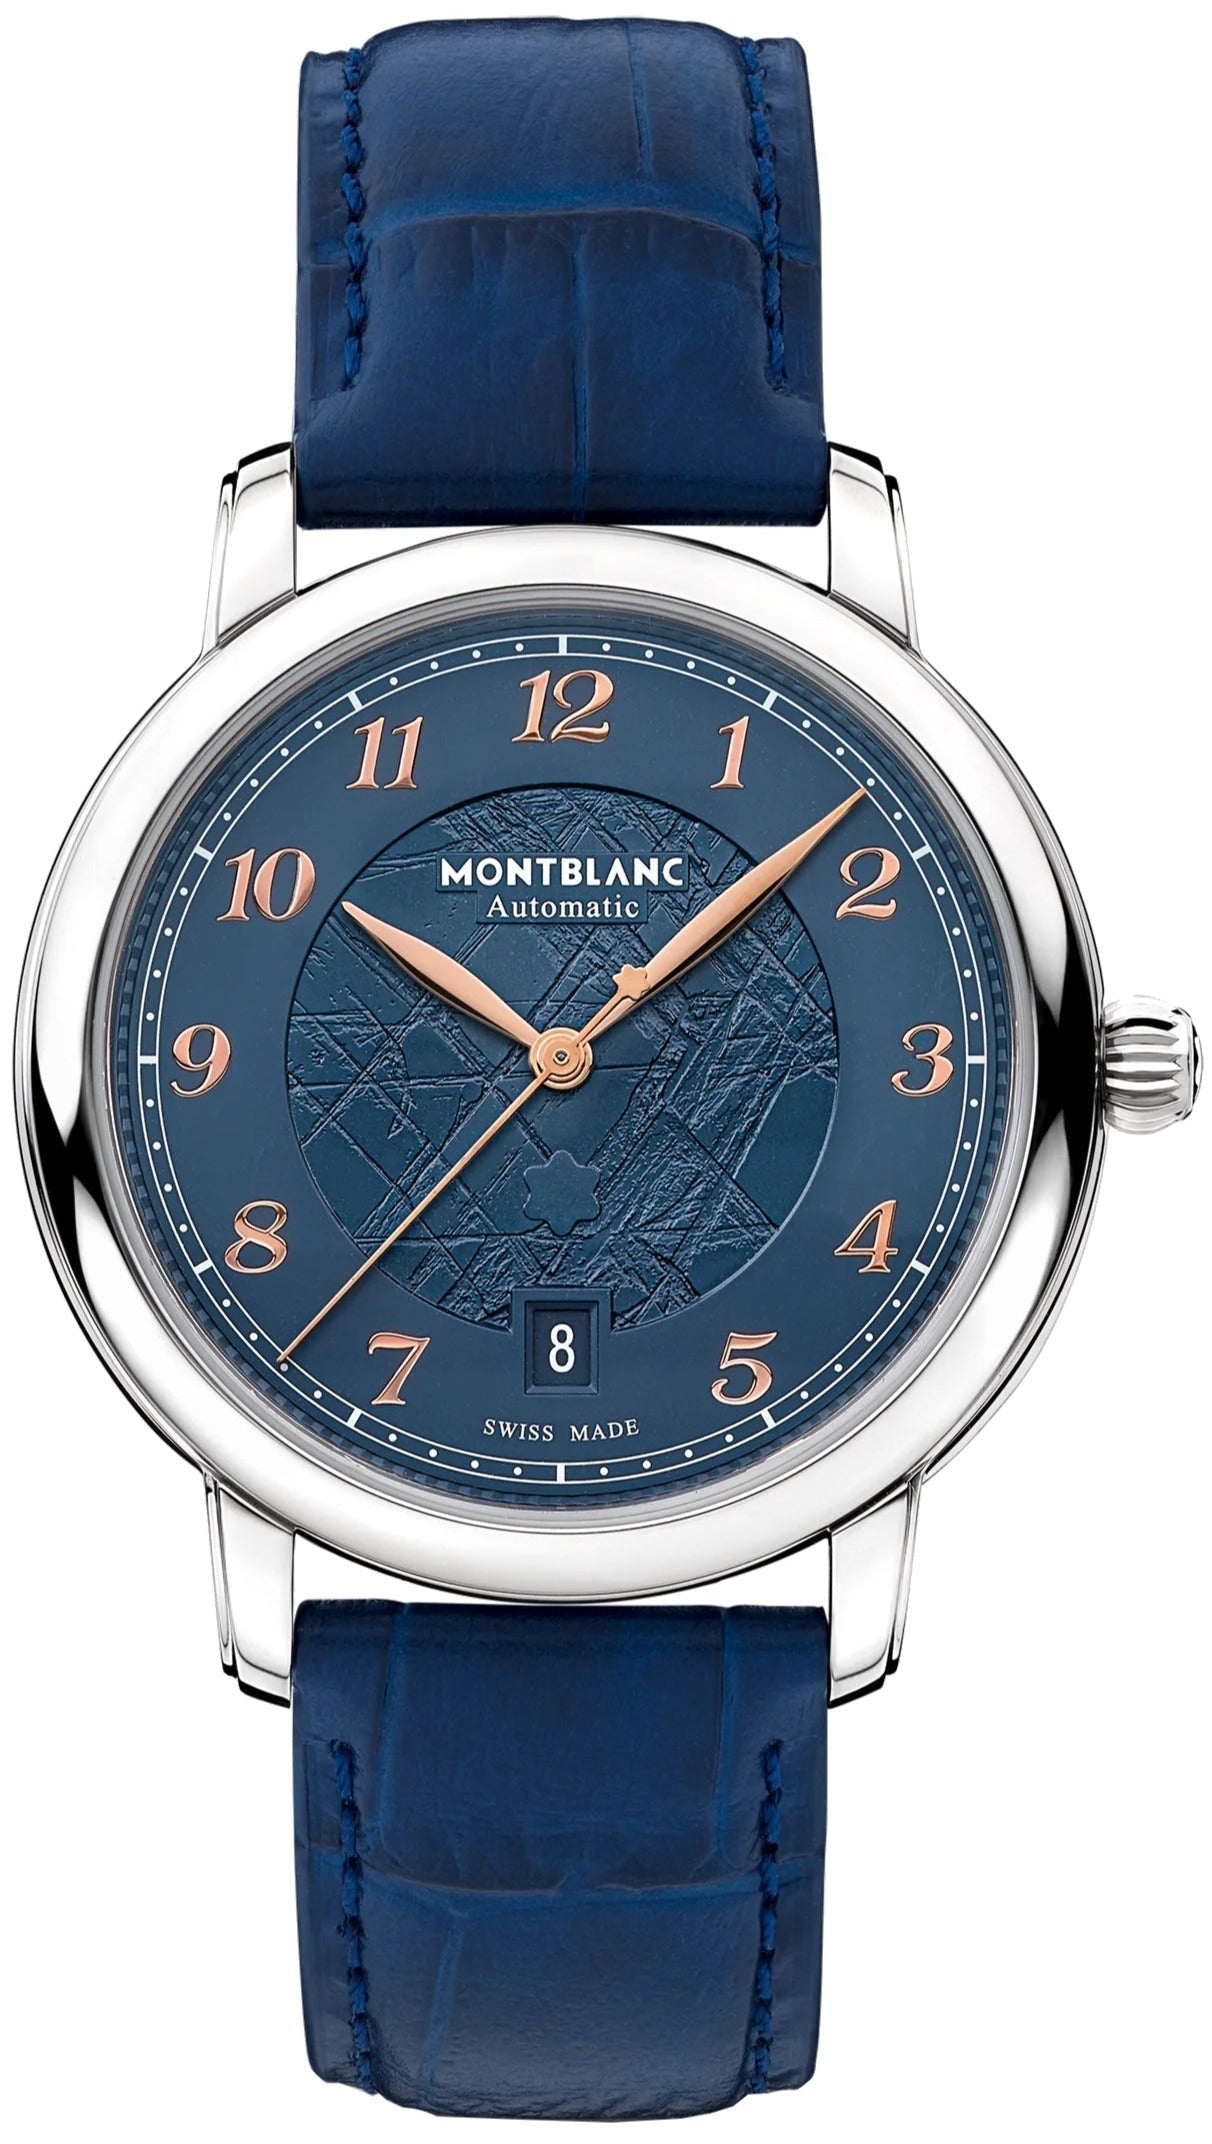 Photos - Wrist Watch Mont Blanc Montblanc Watch Star Legacy Automatic Date 39 Limited Edition - Blue MNTB 